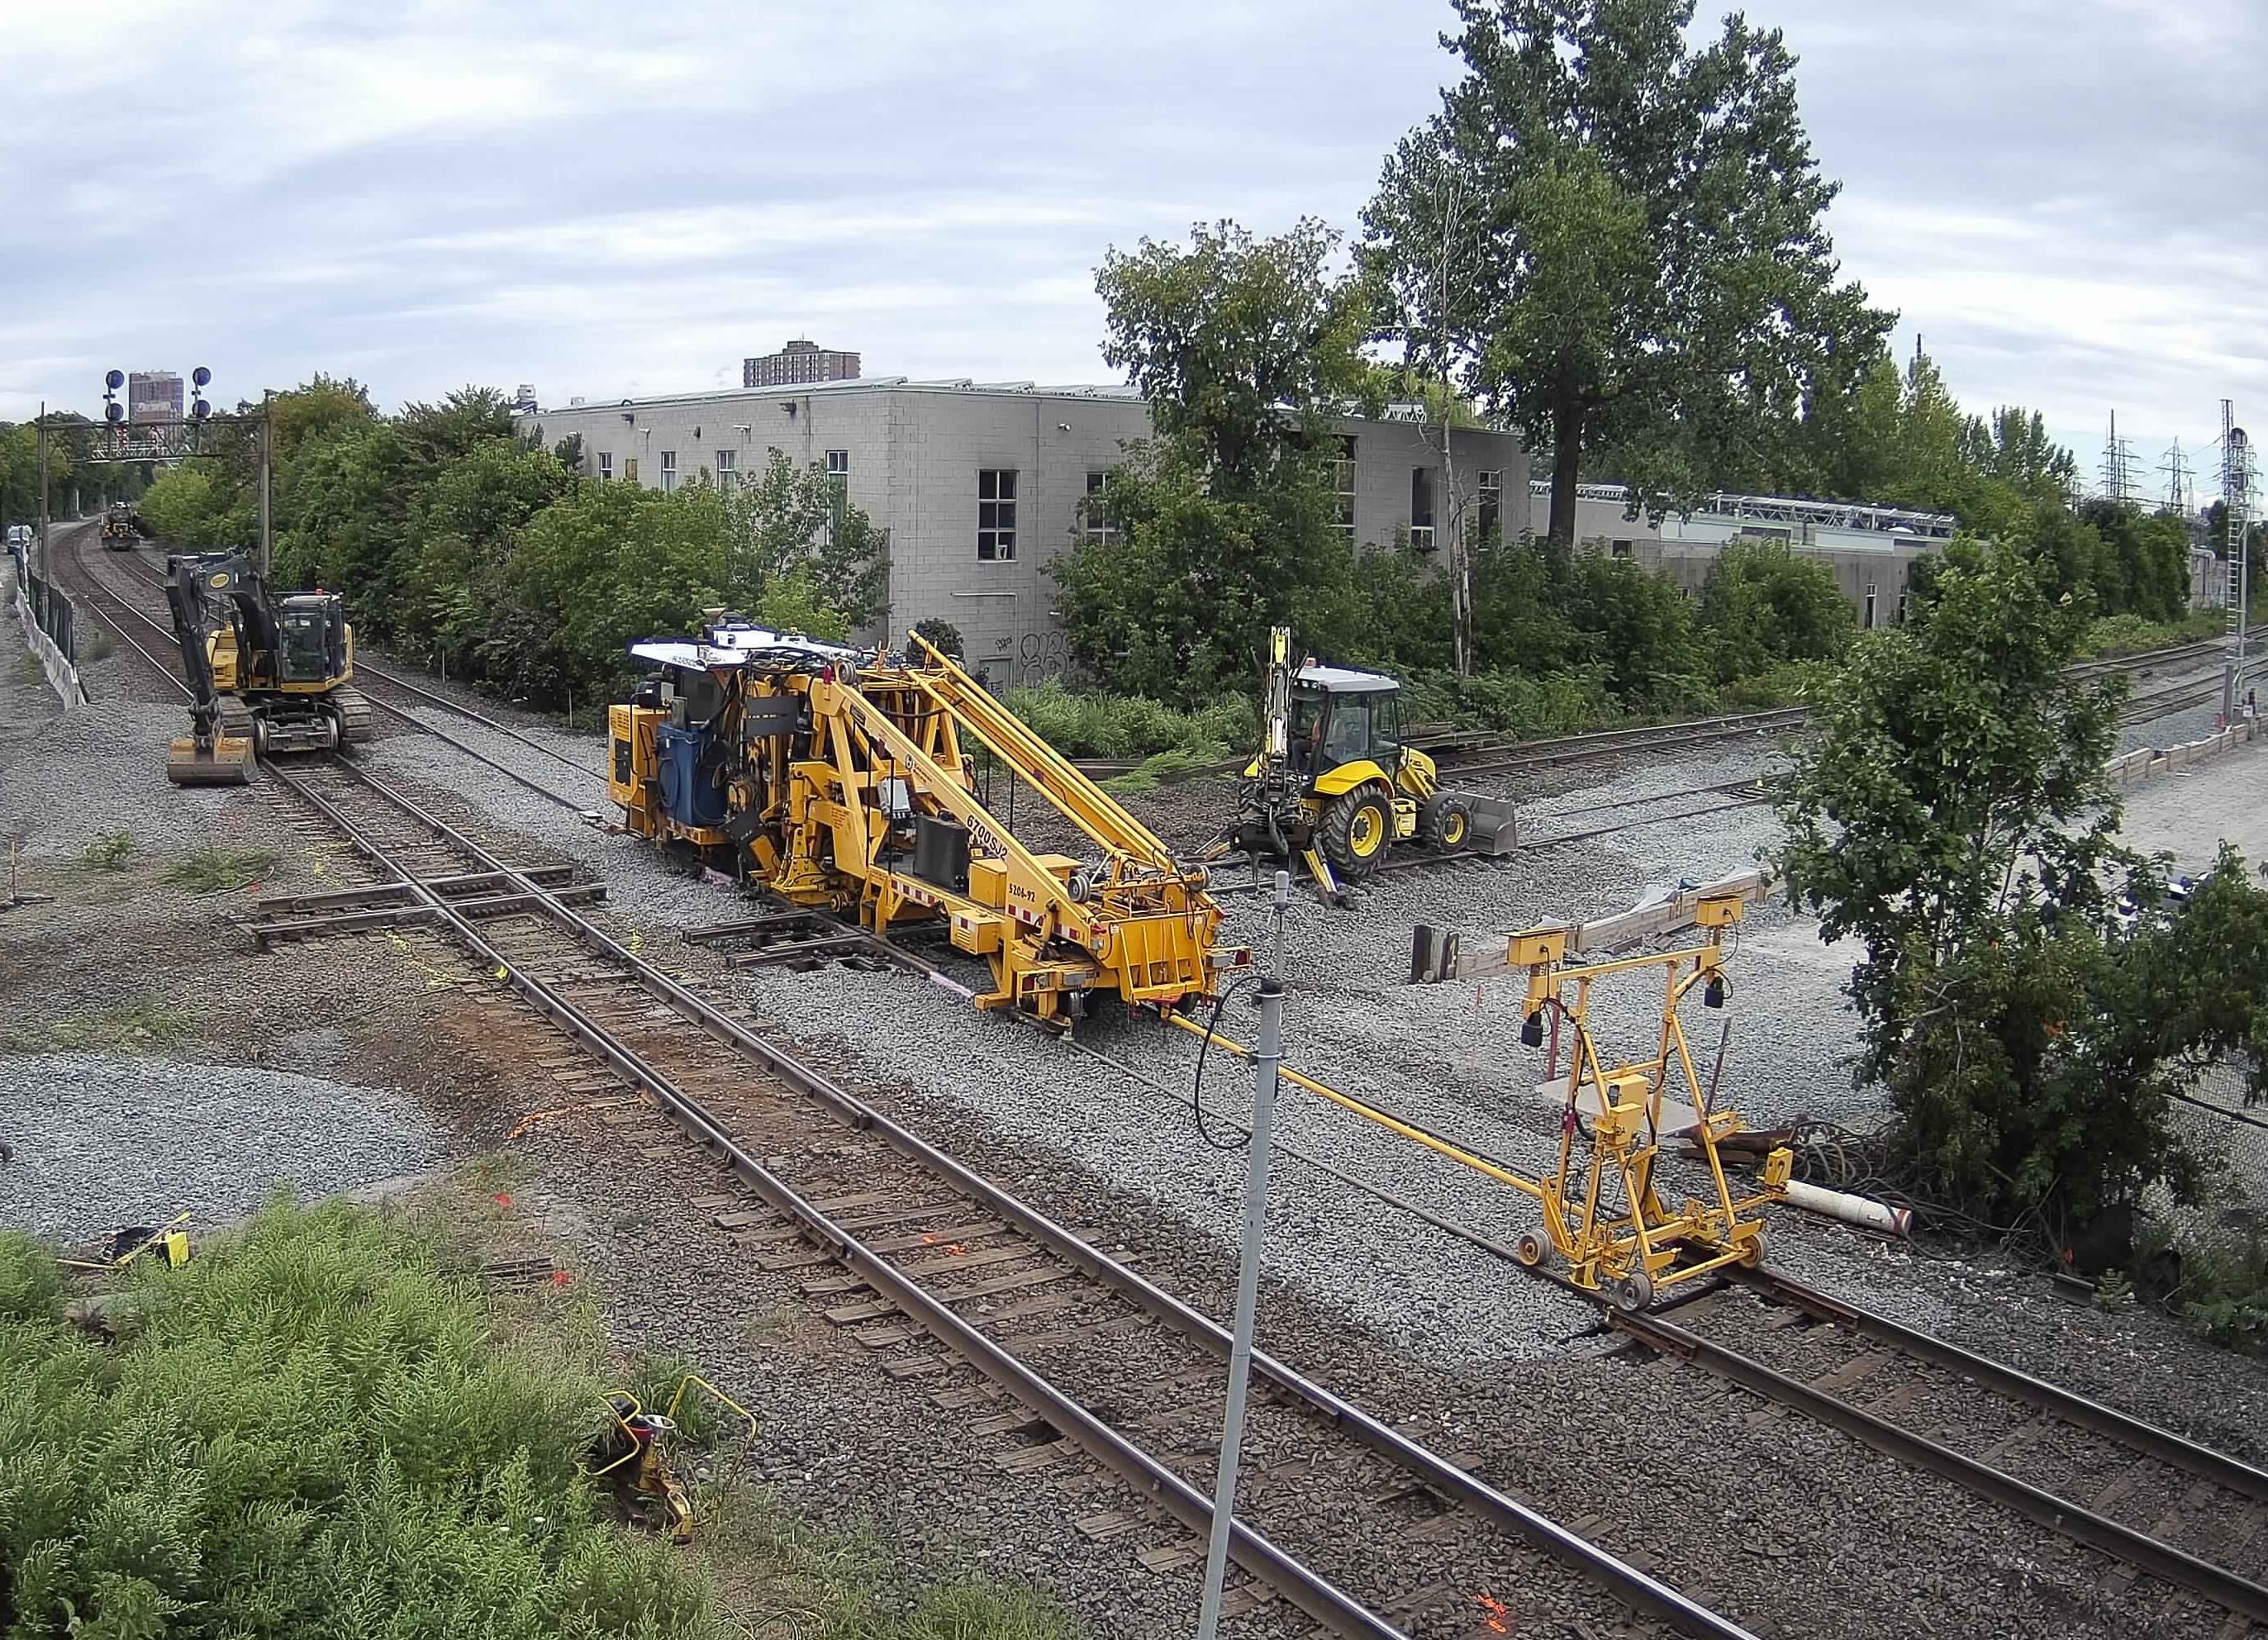 Track is put down by a large machine.